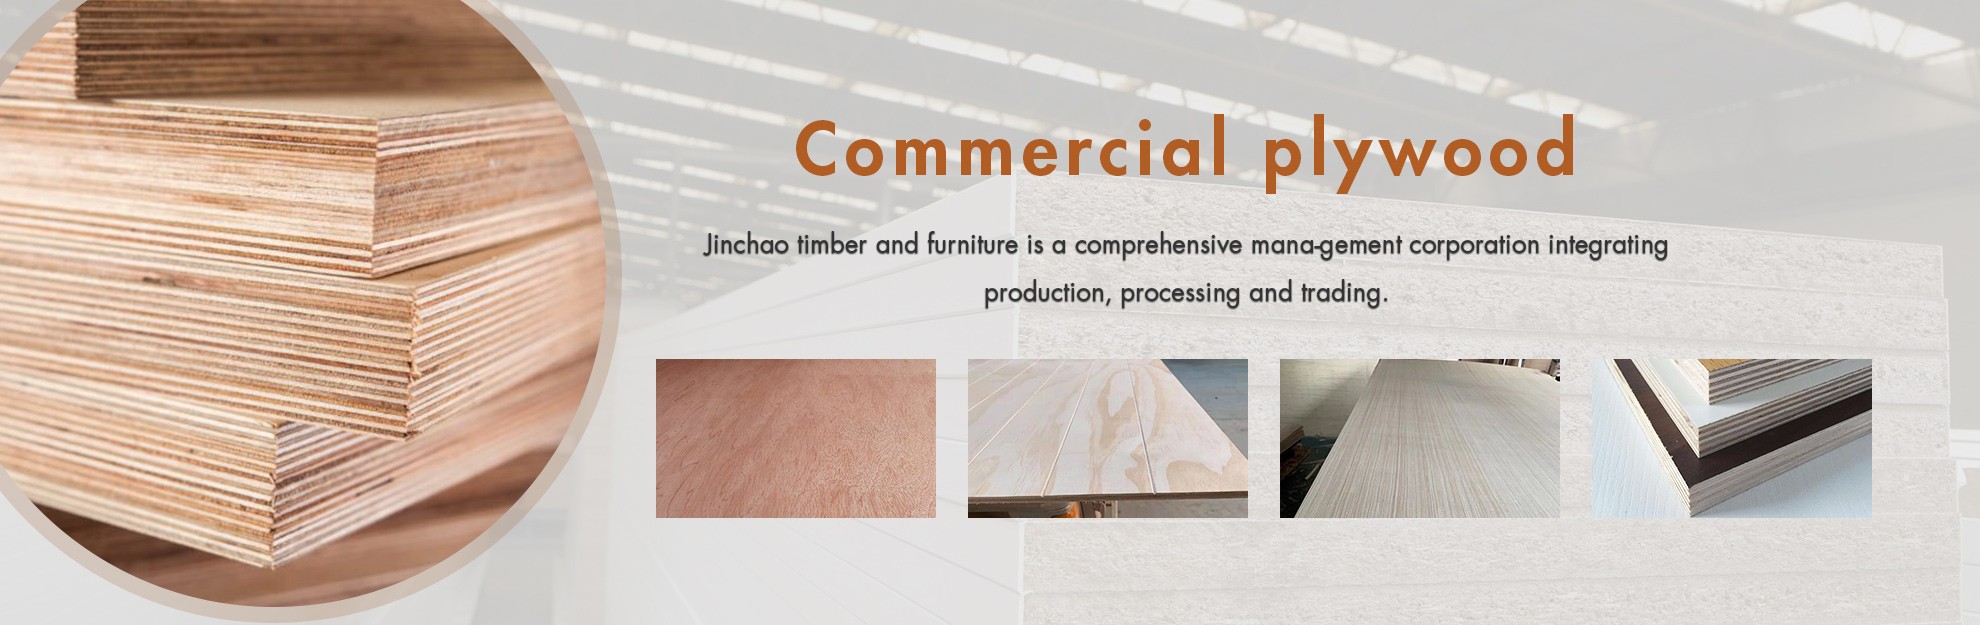 Commercia Plywood